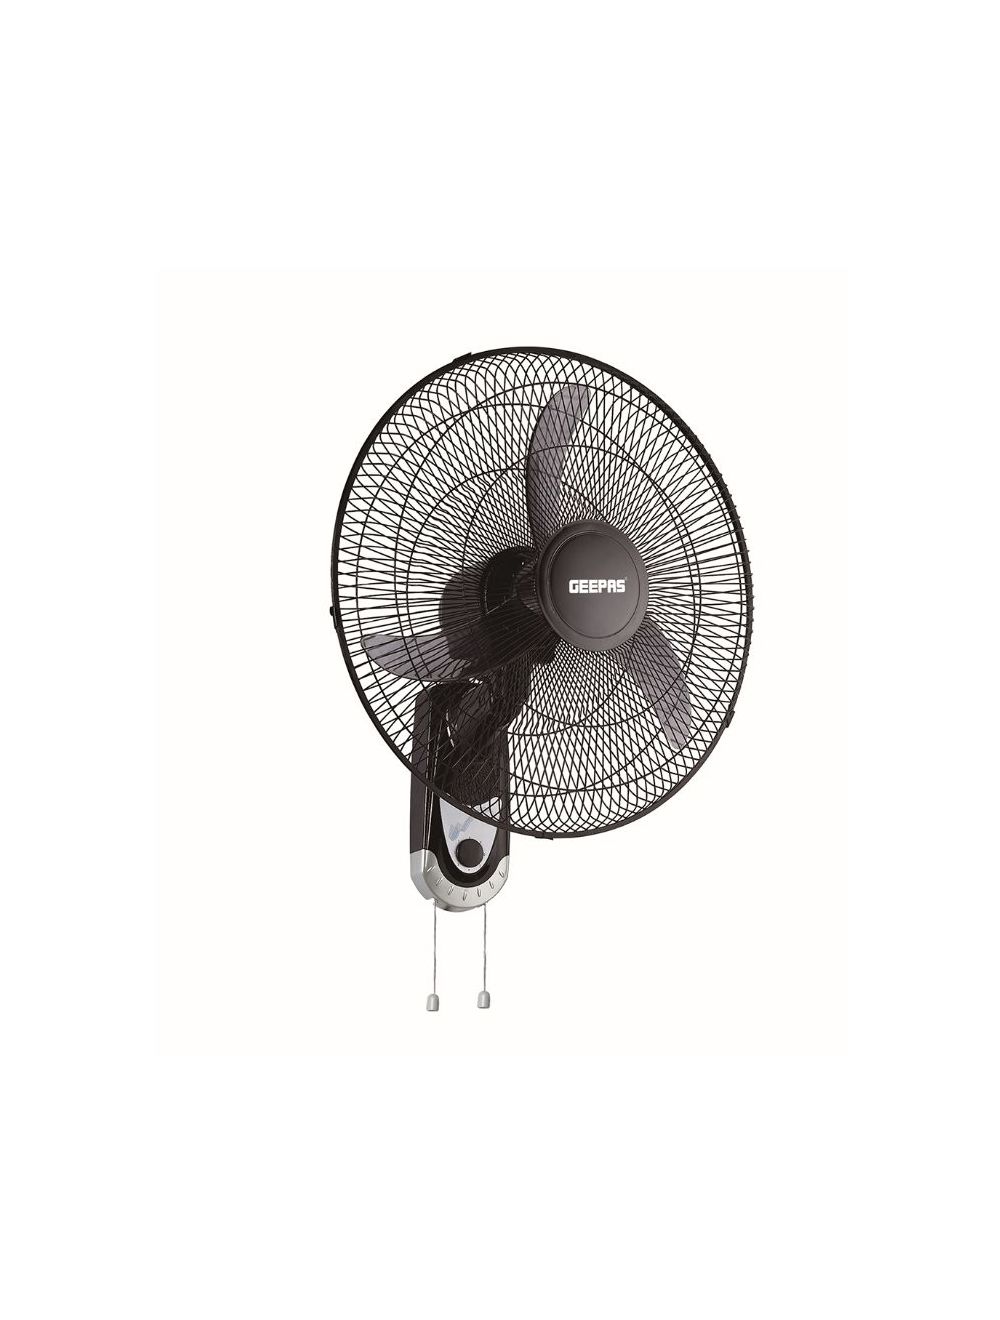 Geepas Electric Wall Mount Fan, Black, 18 inhes, GF9604